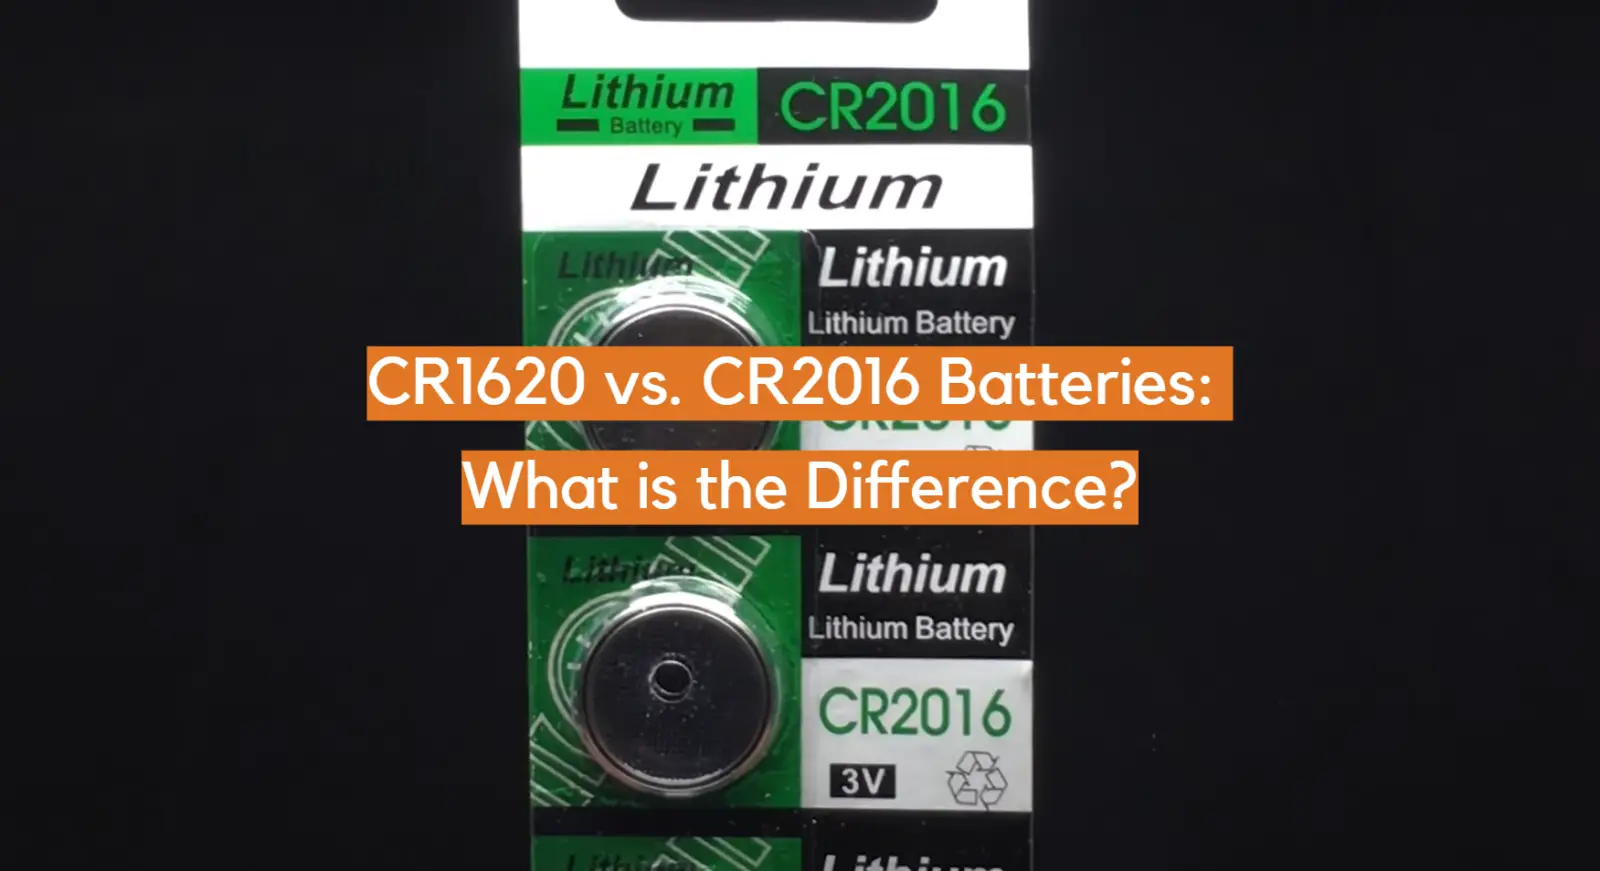 CR1620 vs. CR2016 Batteries: What is the Difference?